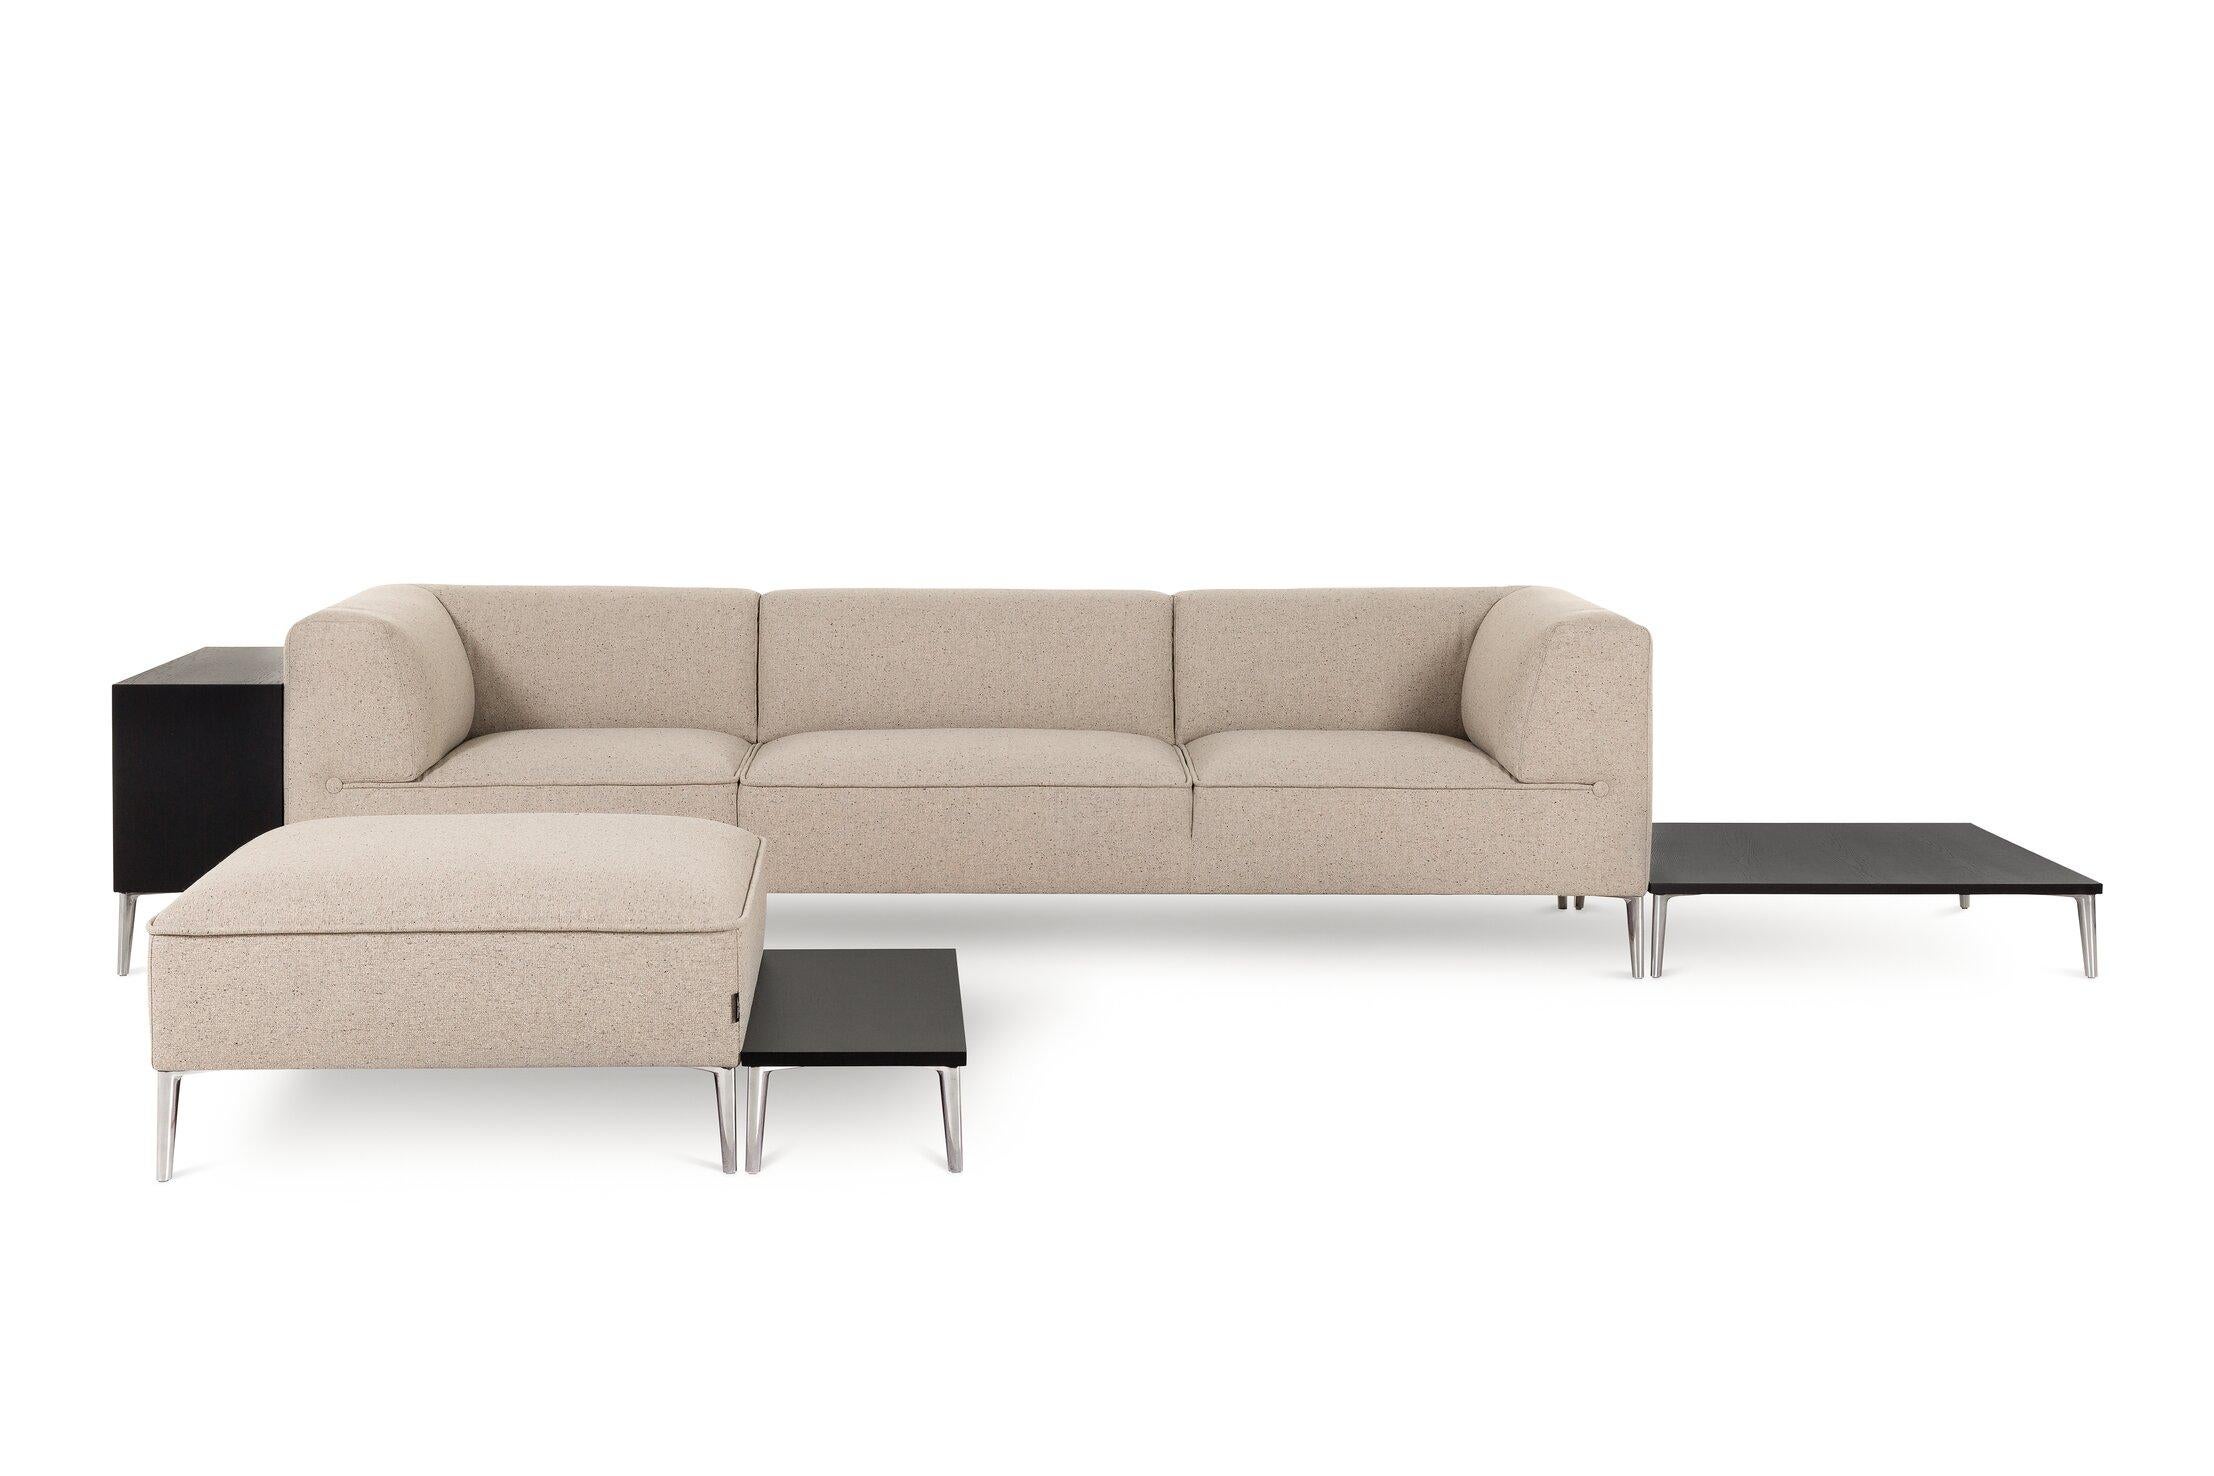 The sofa so good Demi table is part of the modular sofa so good. It can act as a real centrepiece, or blend into your own Sofa So Good configuration. Versatile and sophisticated, it suits every interior and is available in a variety of six wood